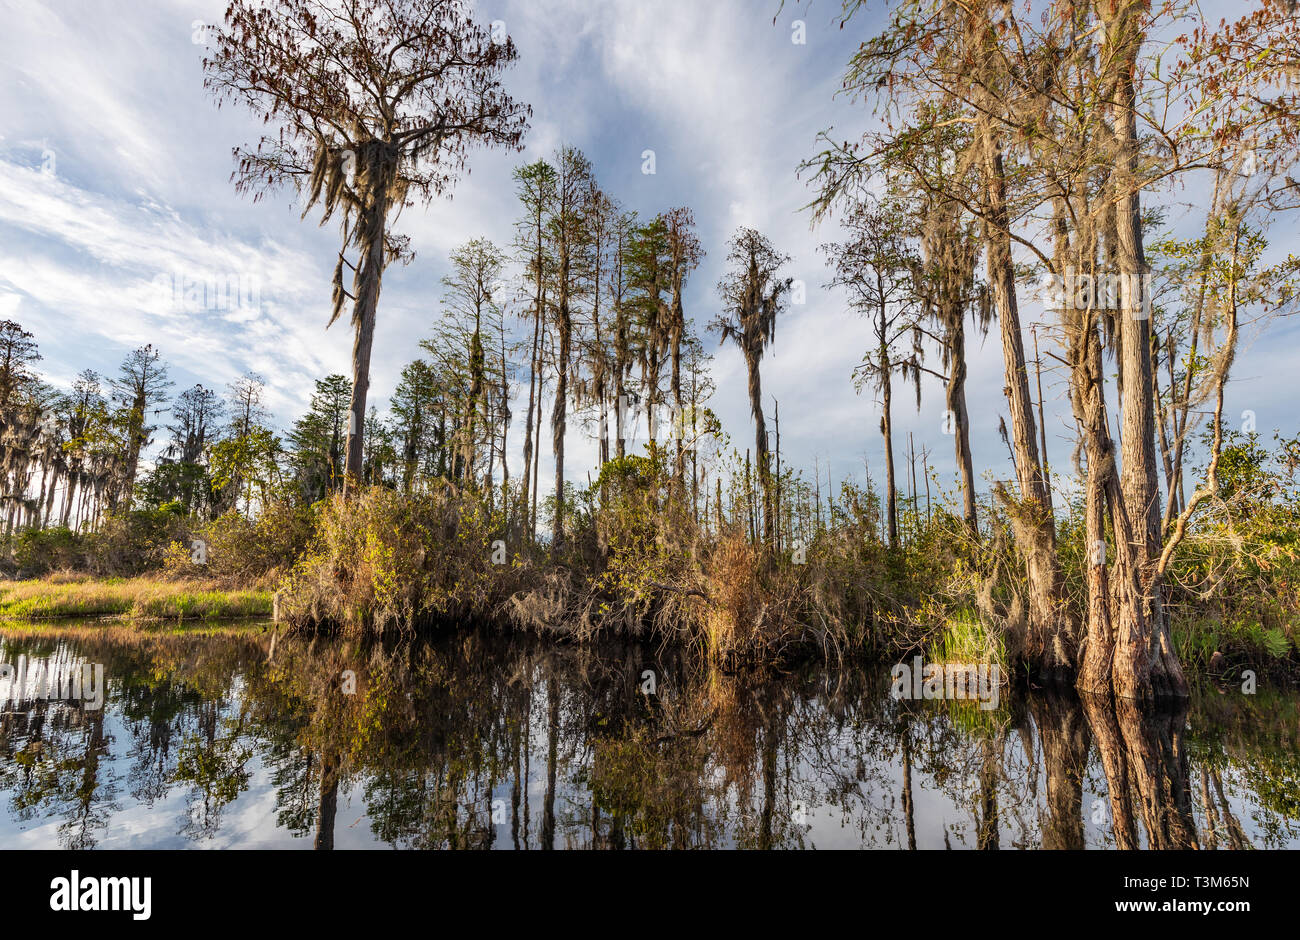 A varied landscape in the Okefenokee swamp on a sunny day, with reflections in the still water. Stock Photo